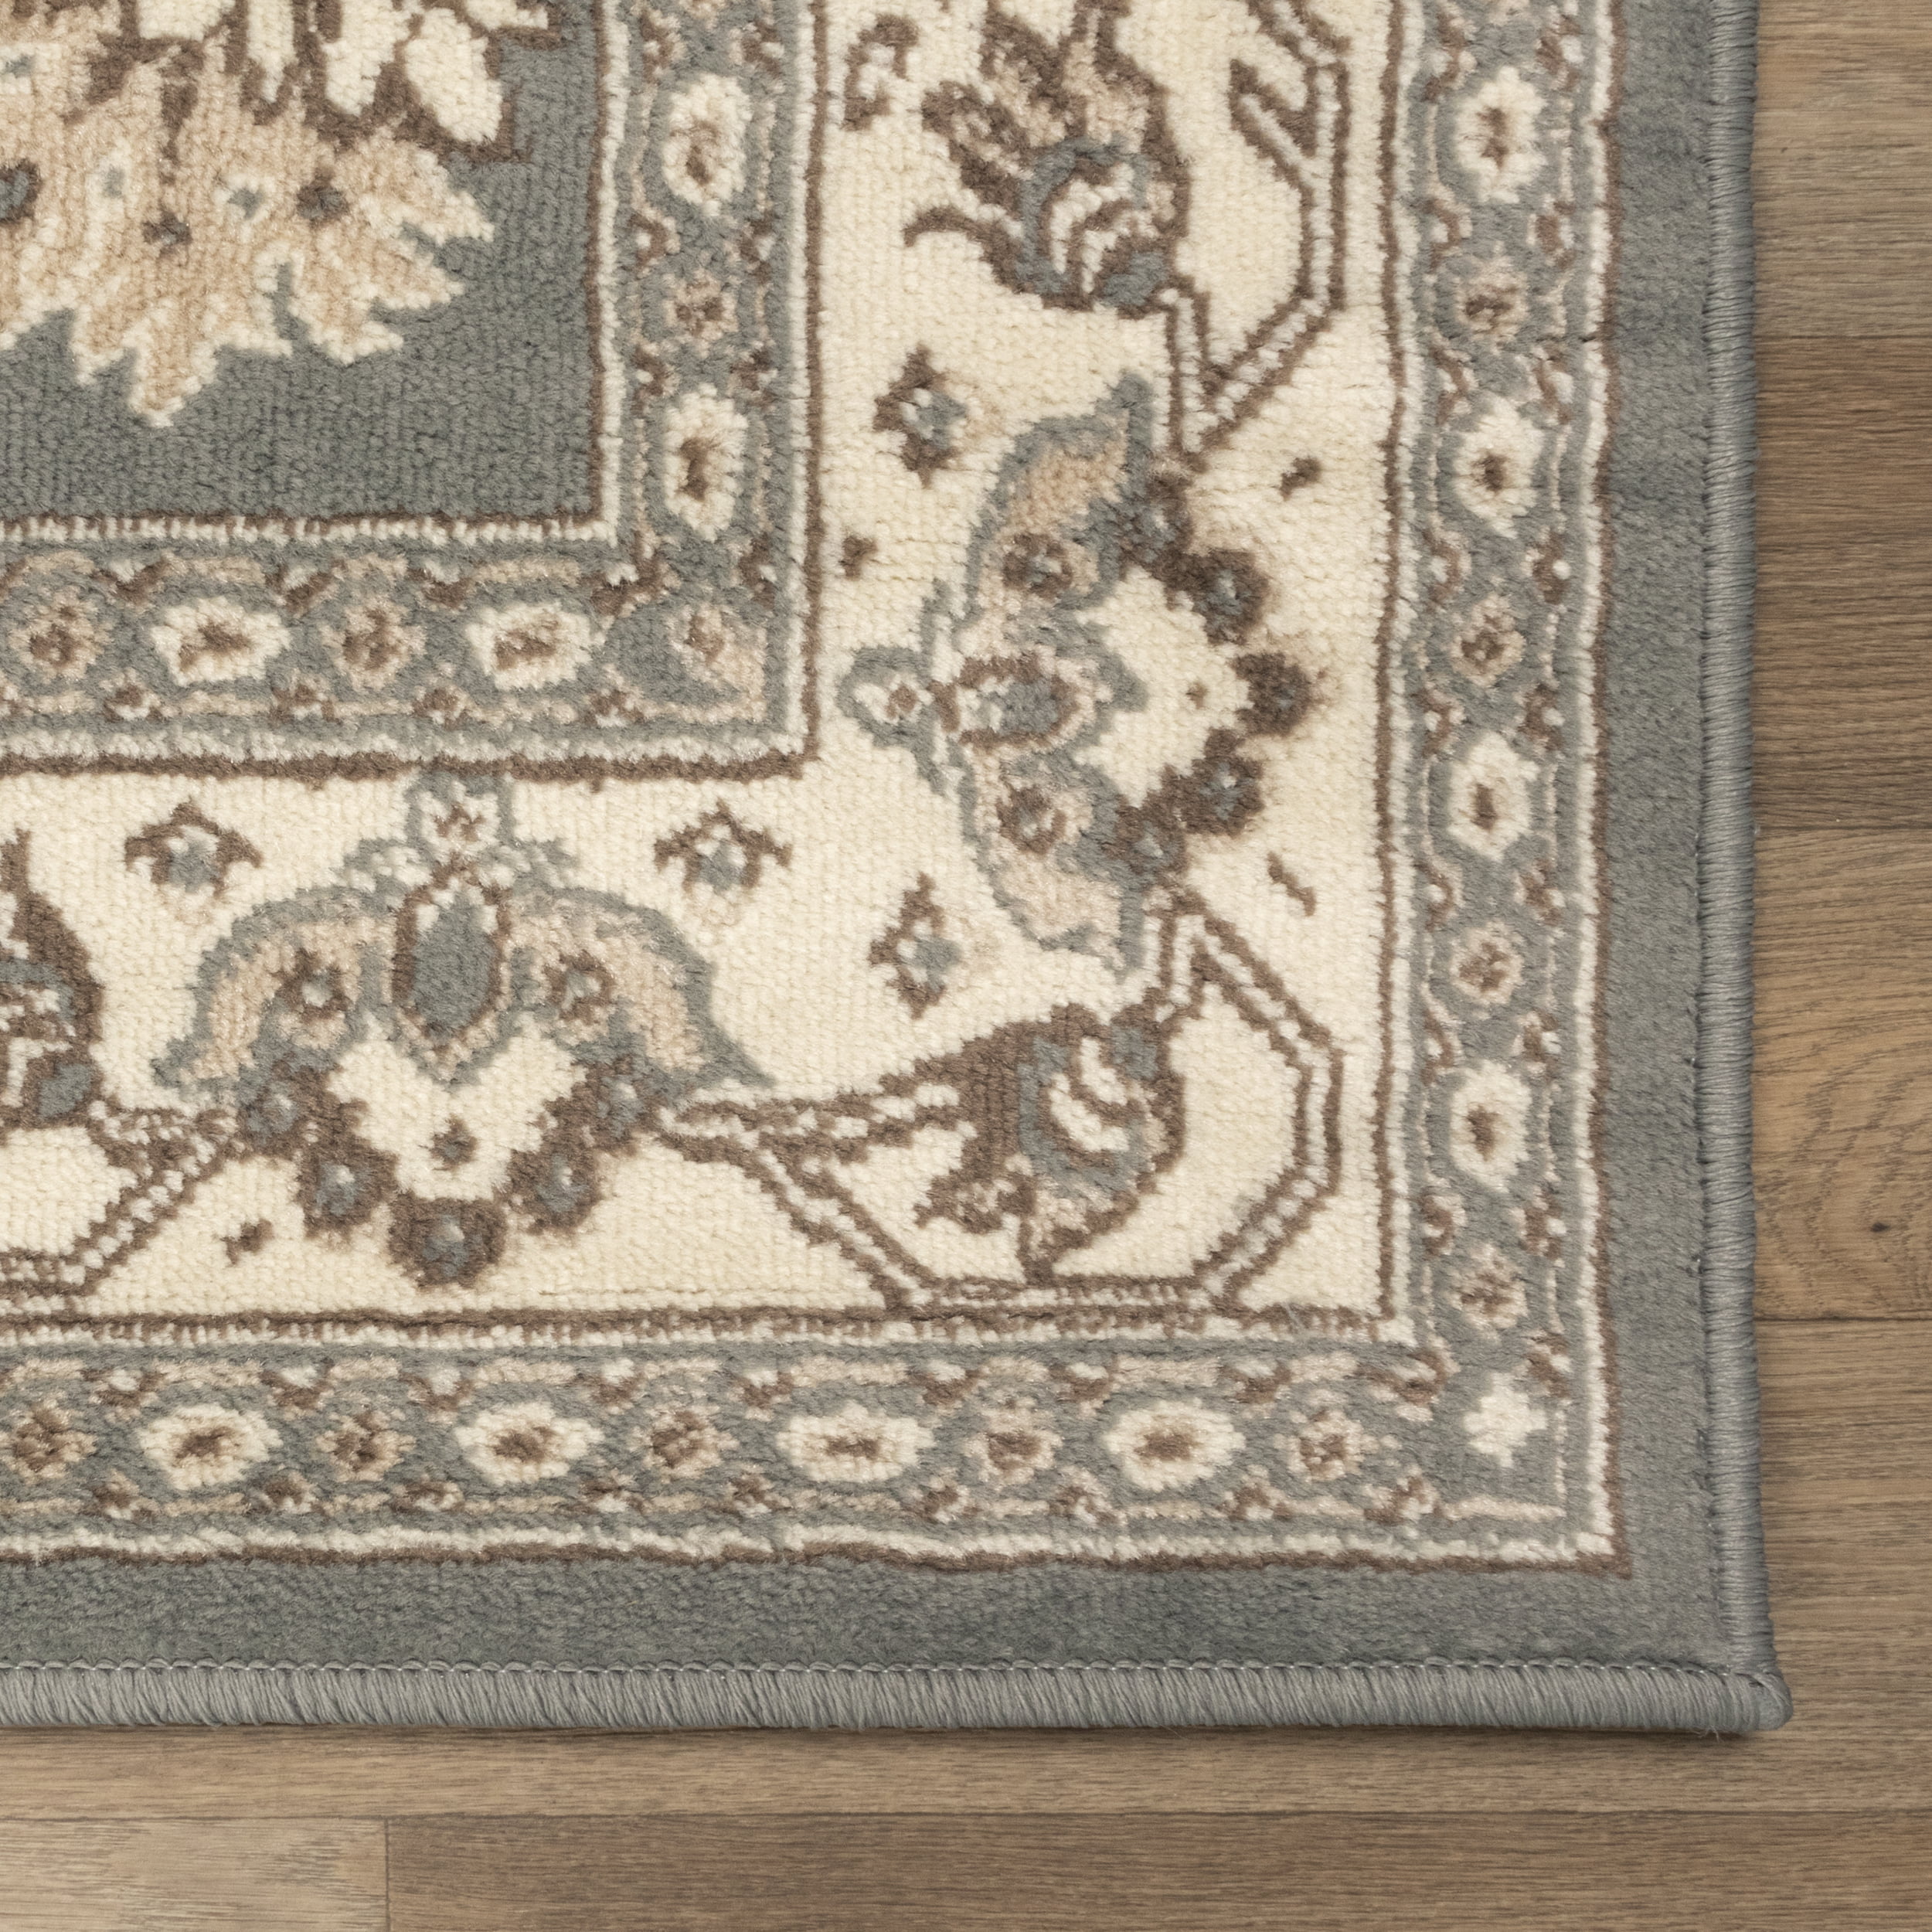 Kingfield Designer Area Rug Collection - image 1 of 3